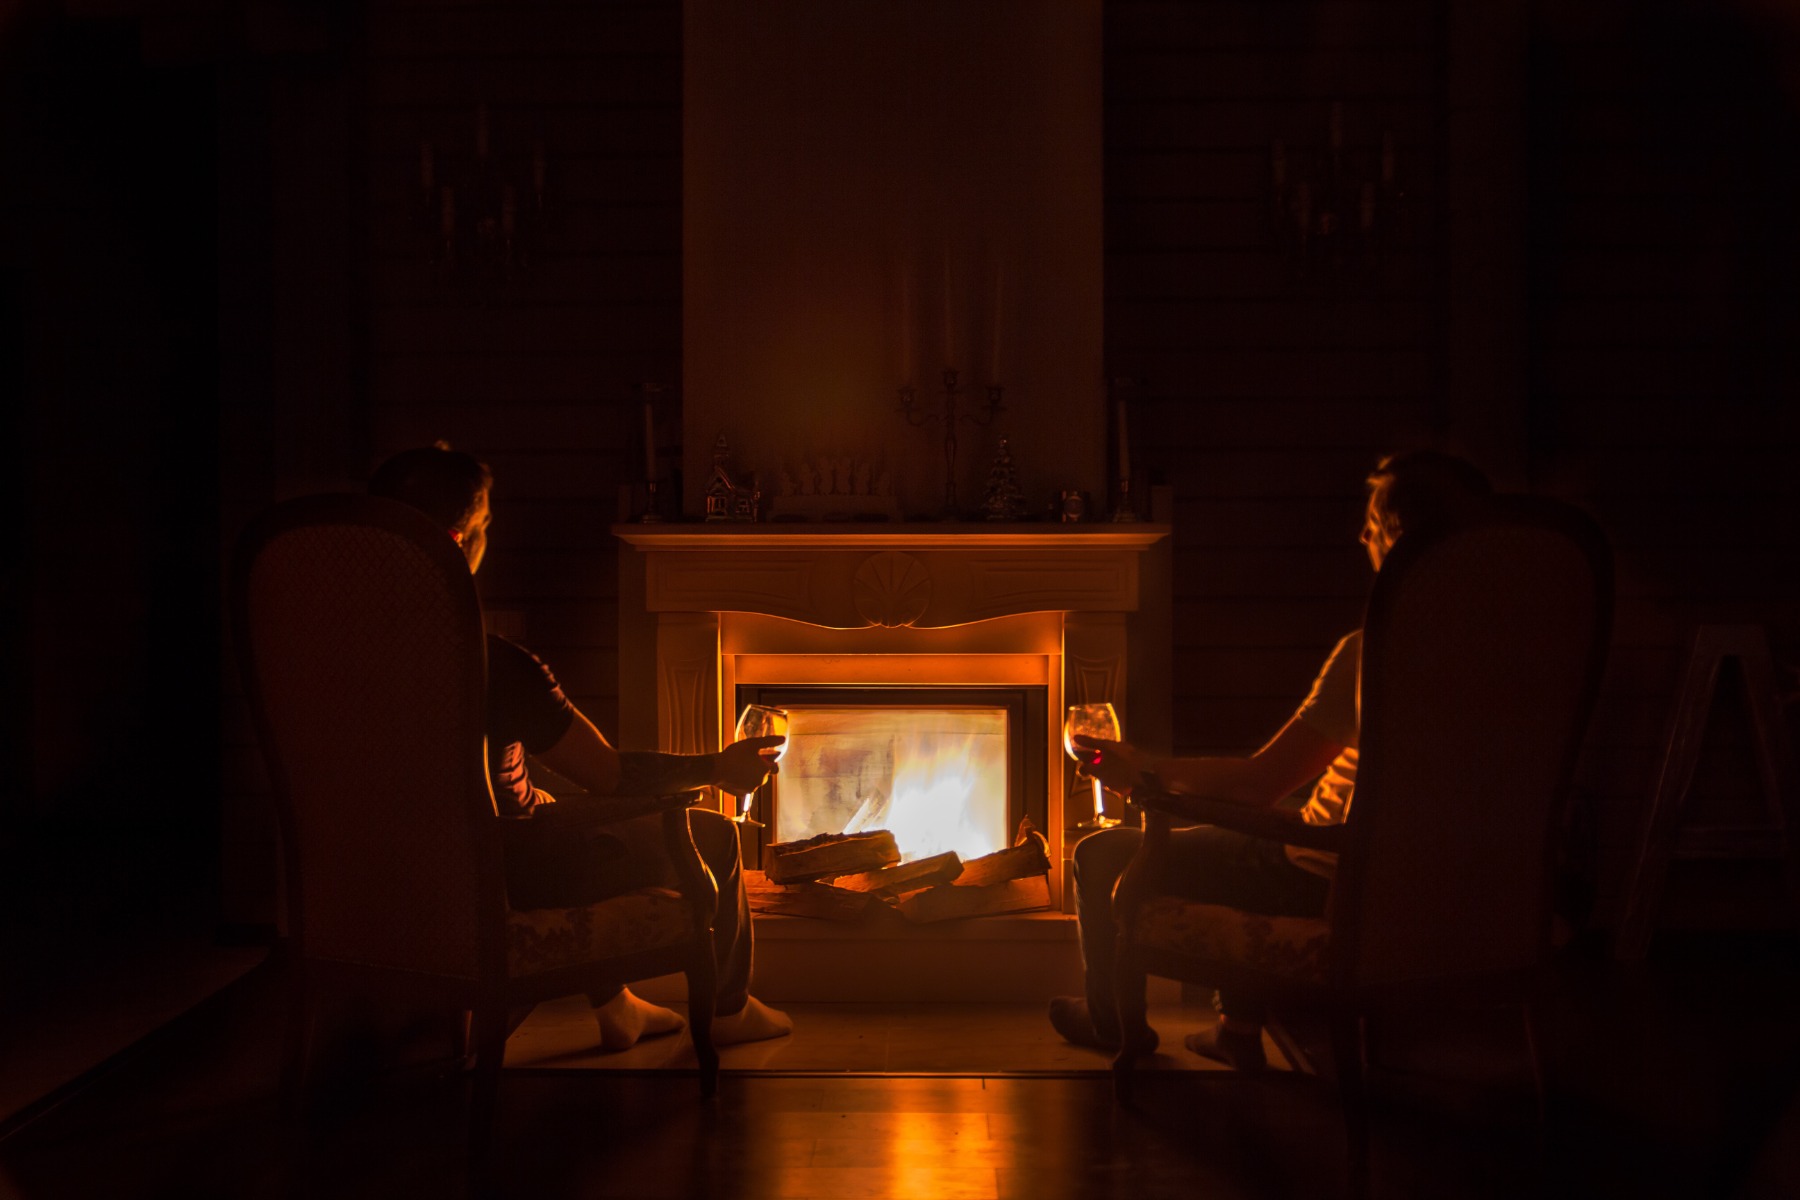 Two people sitting in front of a fireplace with glasses of wine